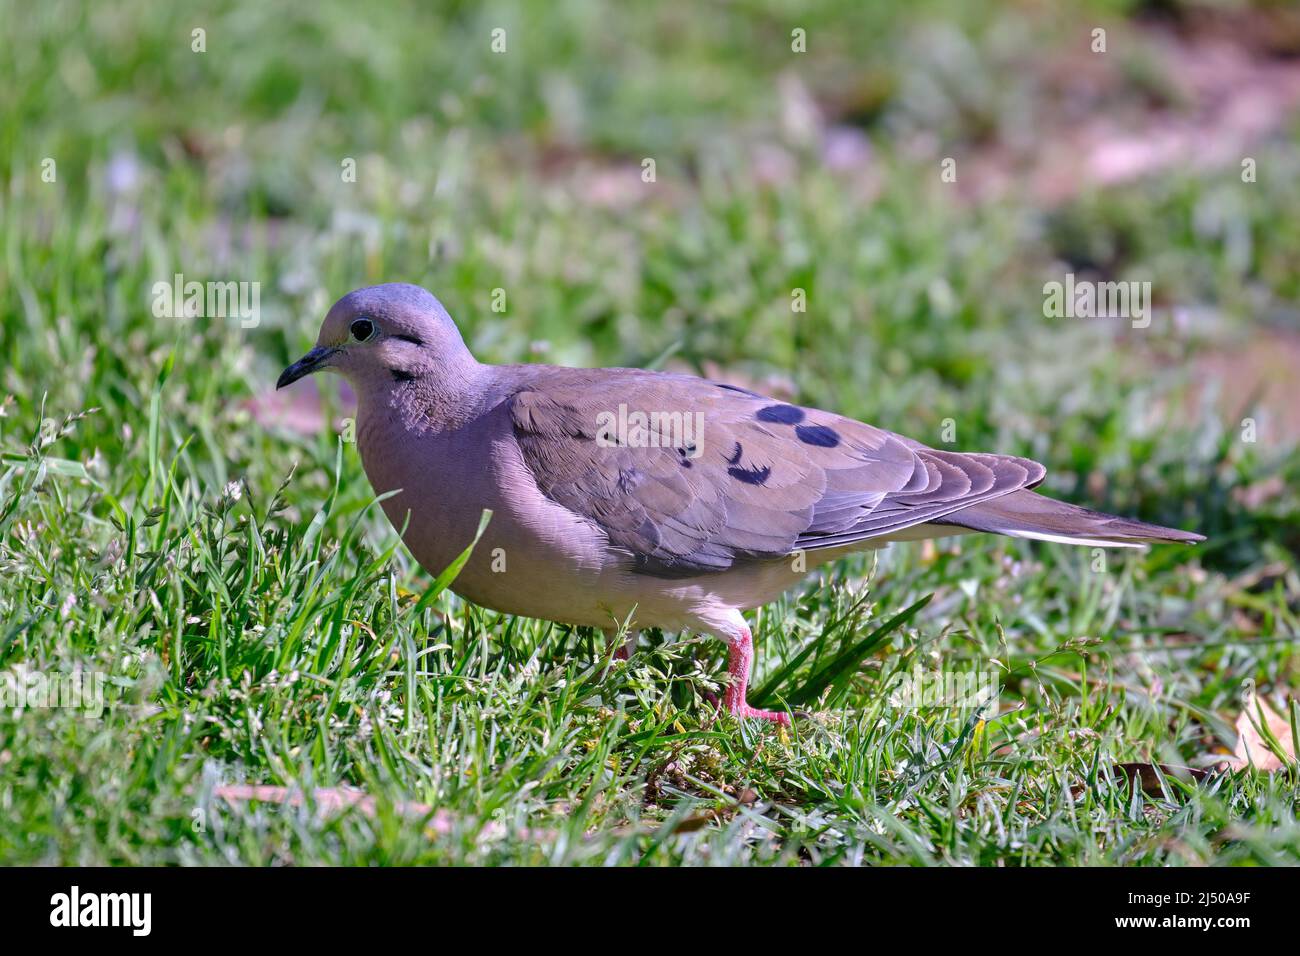 Eared Dove (Zenaida auriculata), walking on the grass looking for its food. Stock Photo